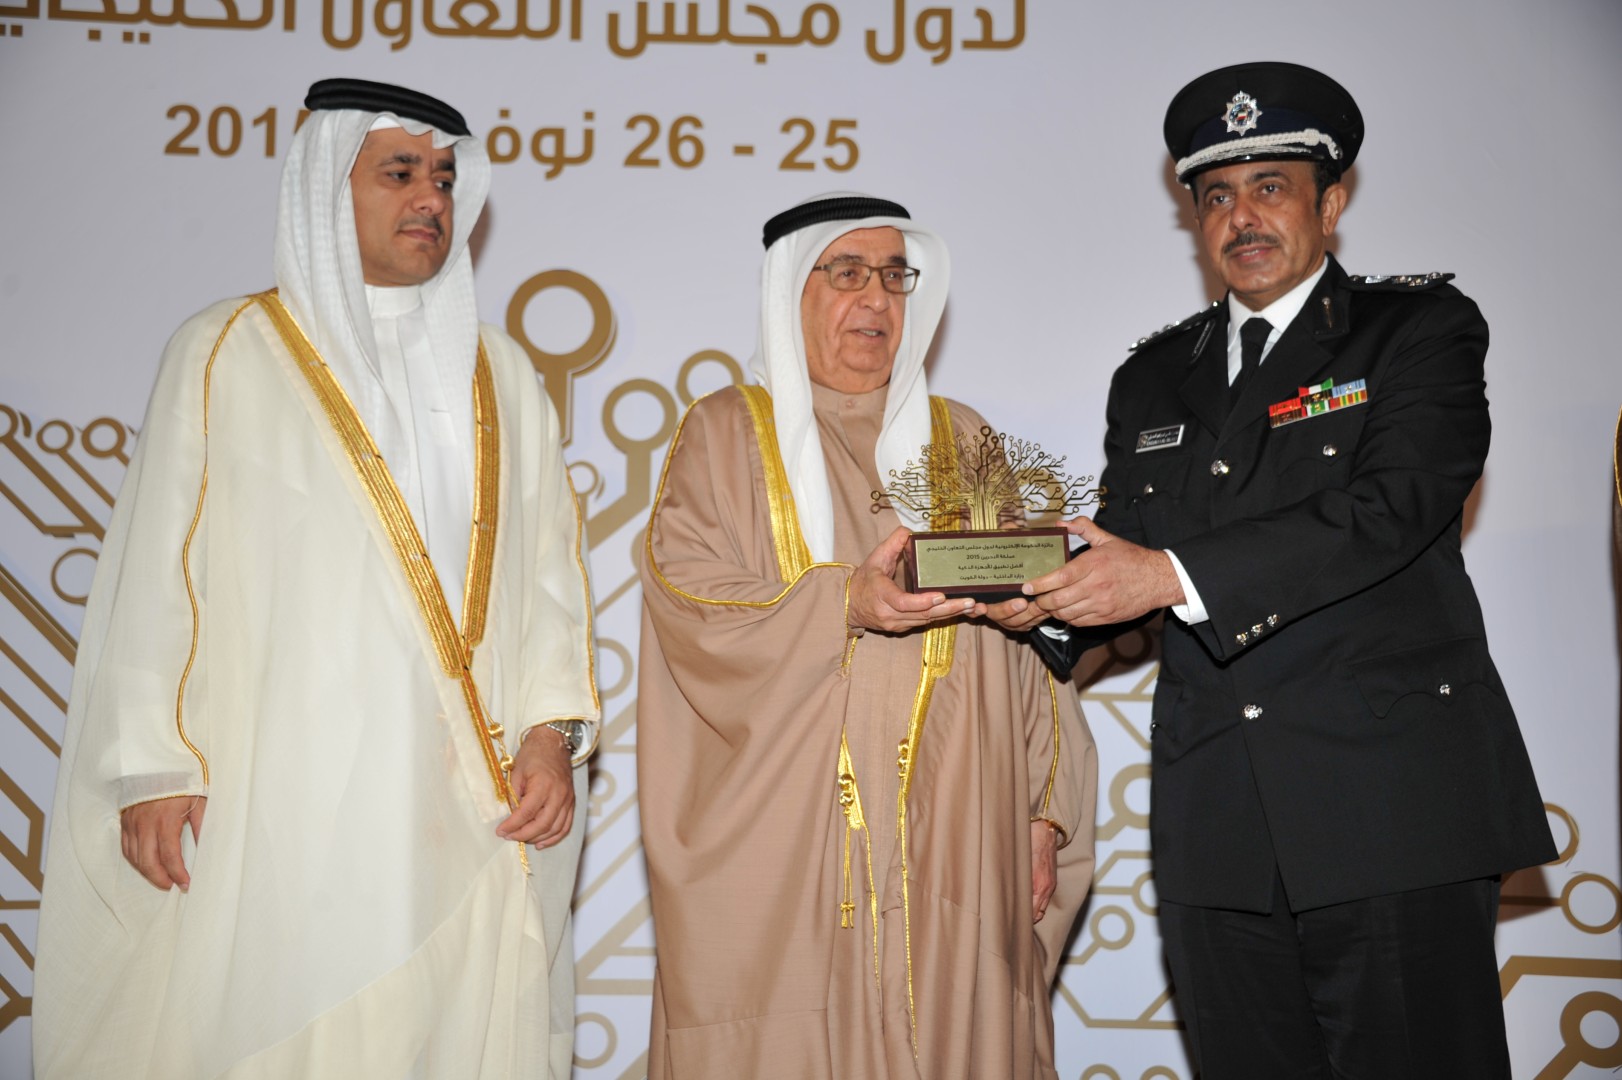 Director of the IT department at the ministry Ali Almuaili receives the prize